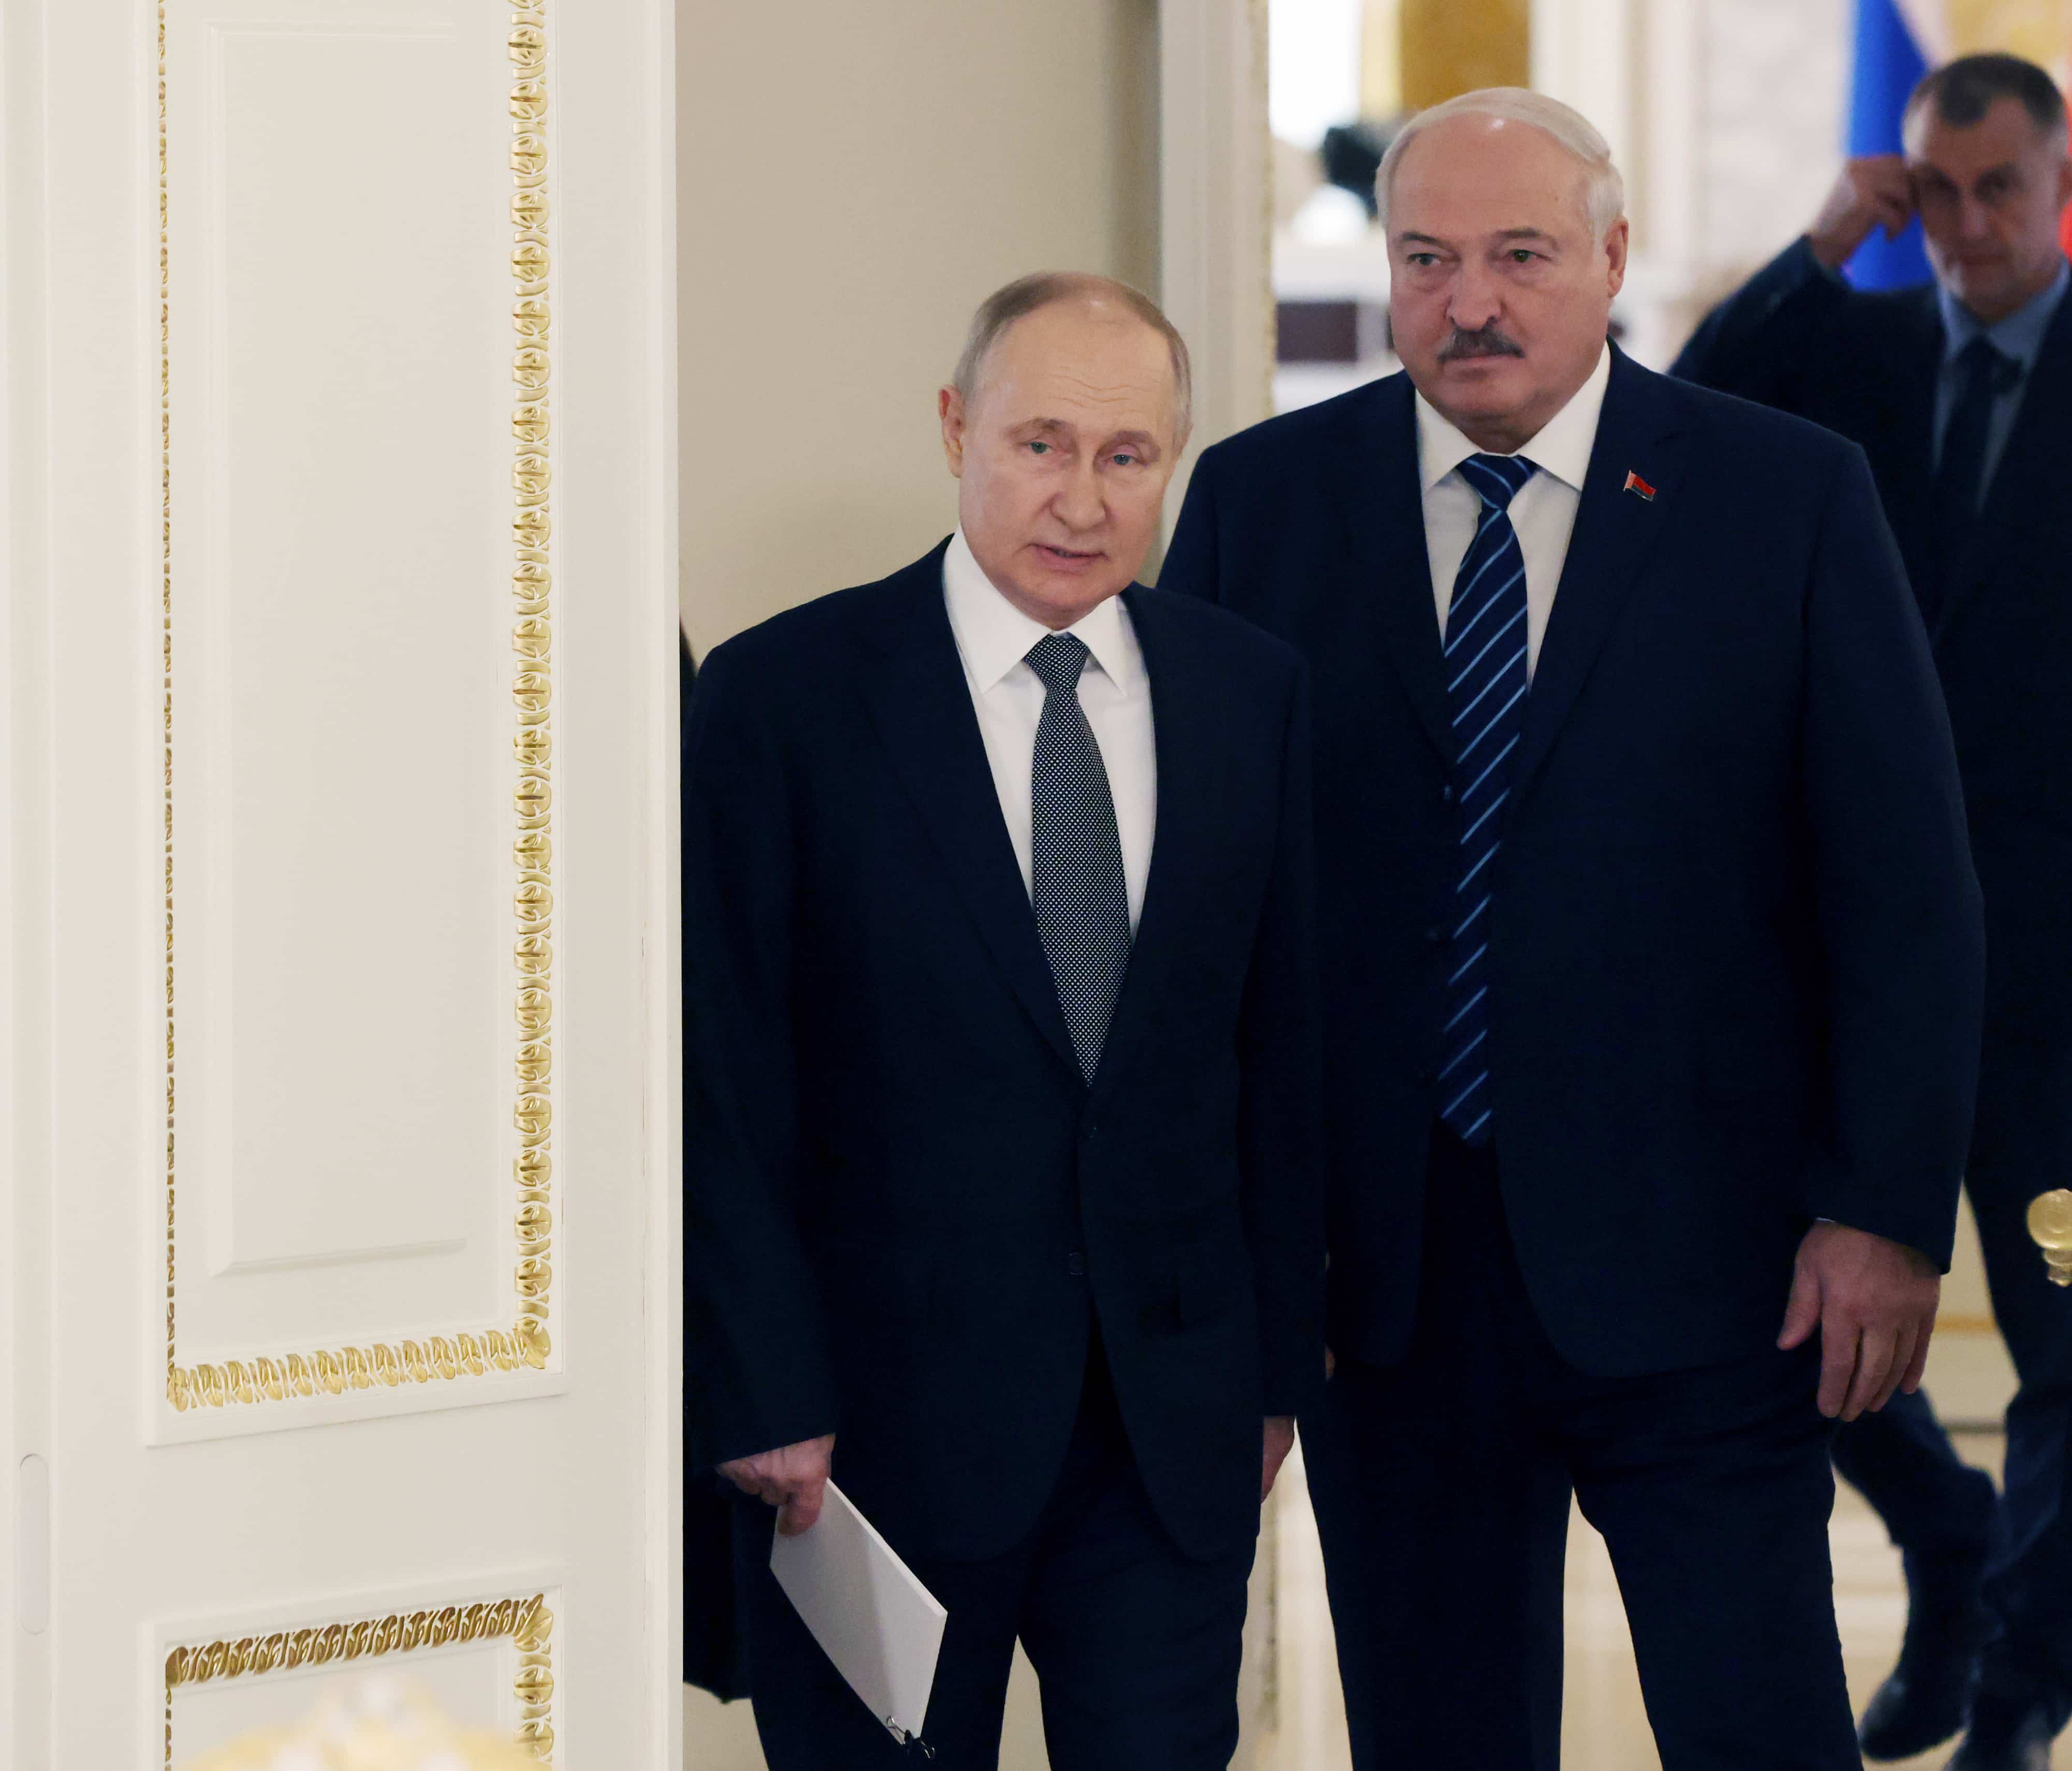 Russia: Lukashenko Undermines Putin's Claim on Moscow Concert Hall Attack